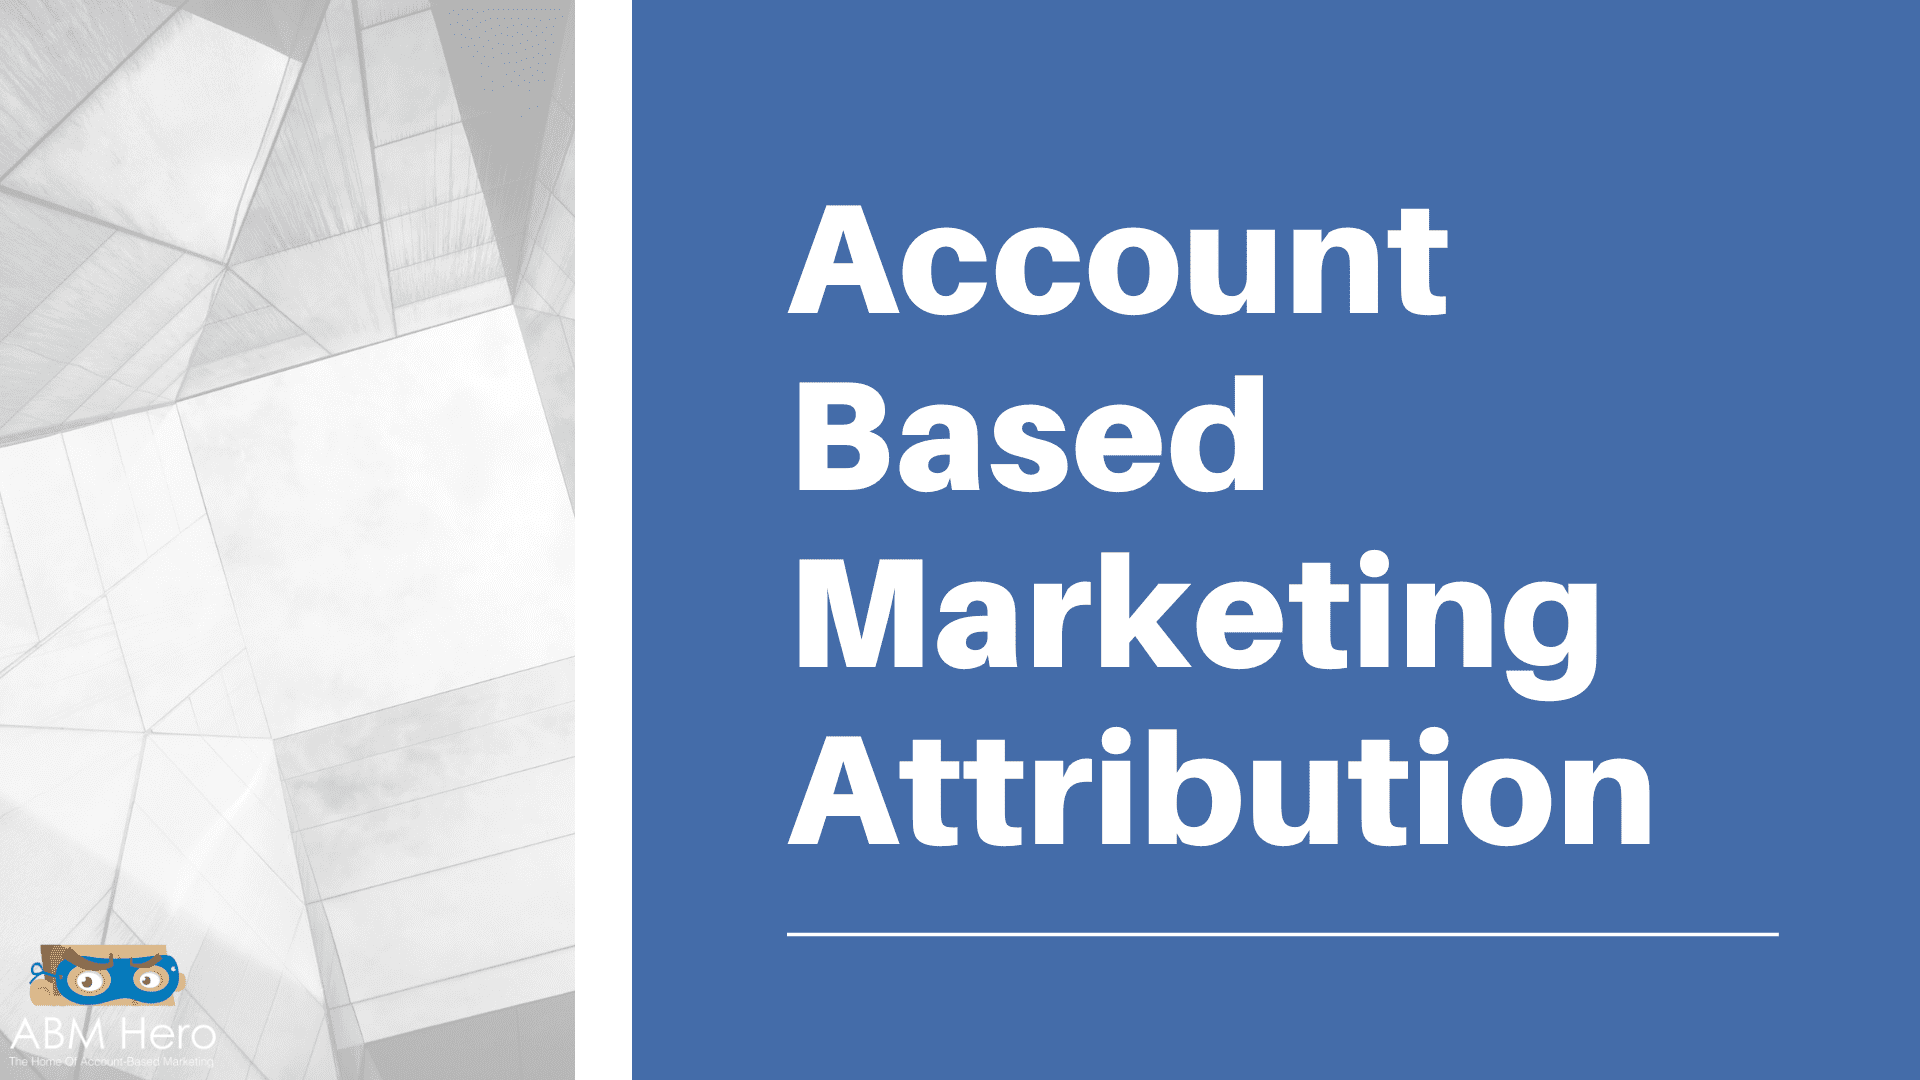 You are currently viewing Account Based Marketing Attribution